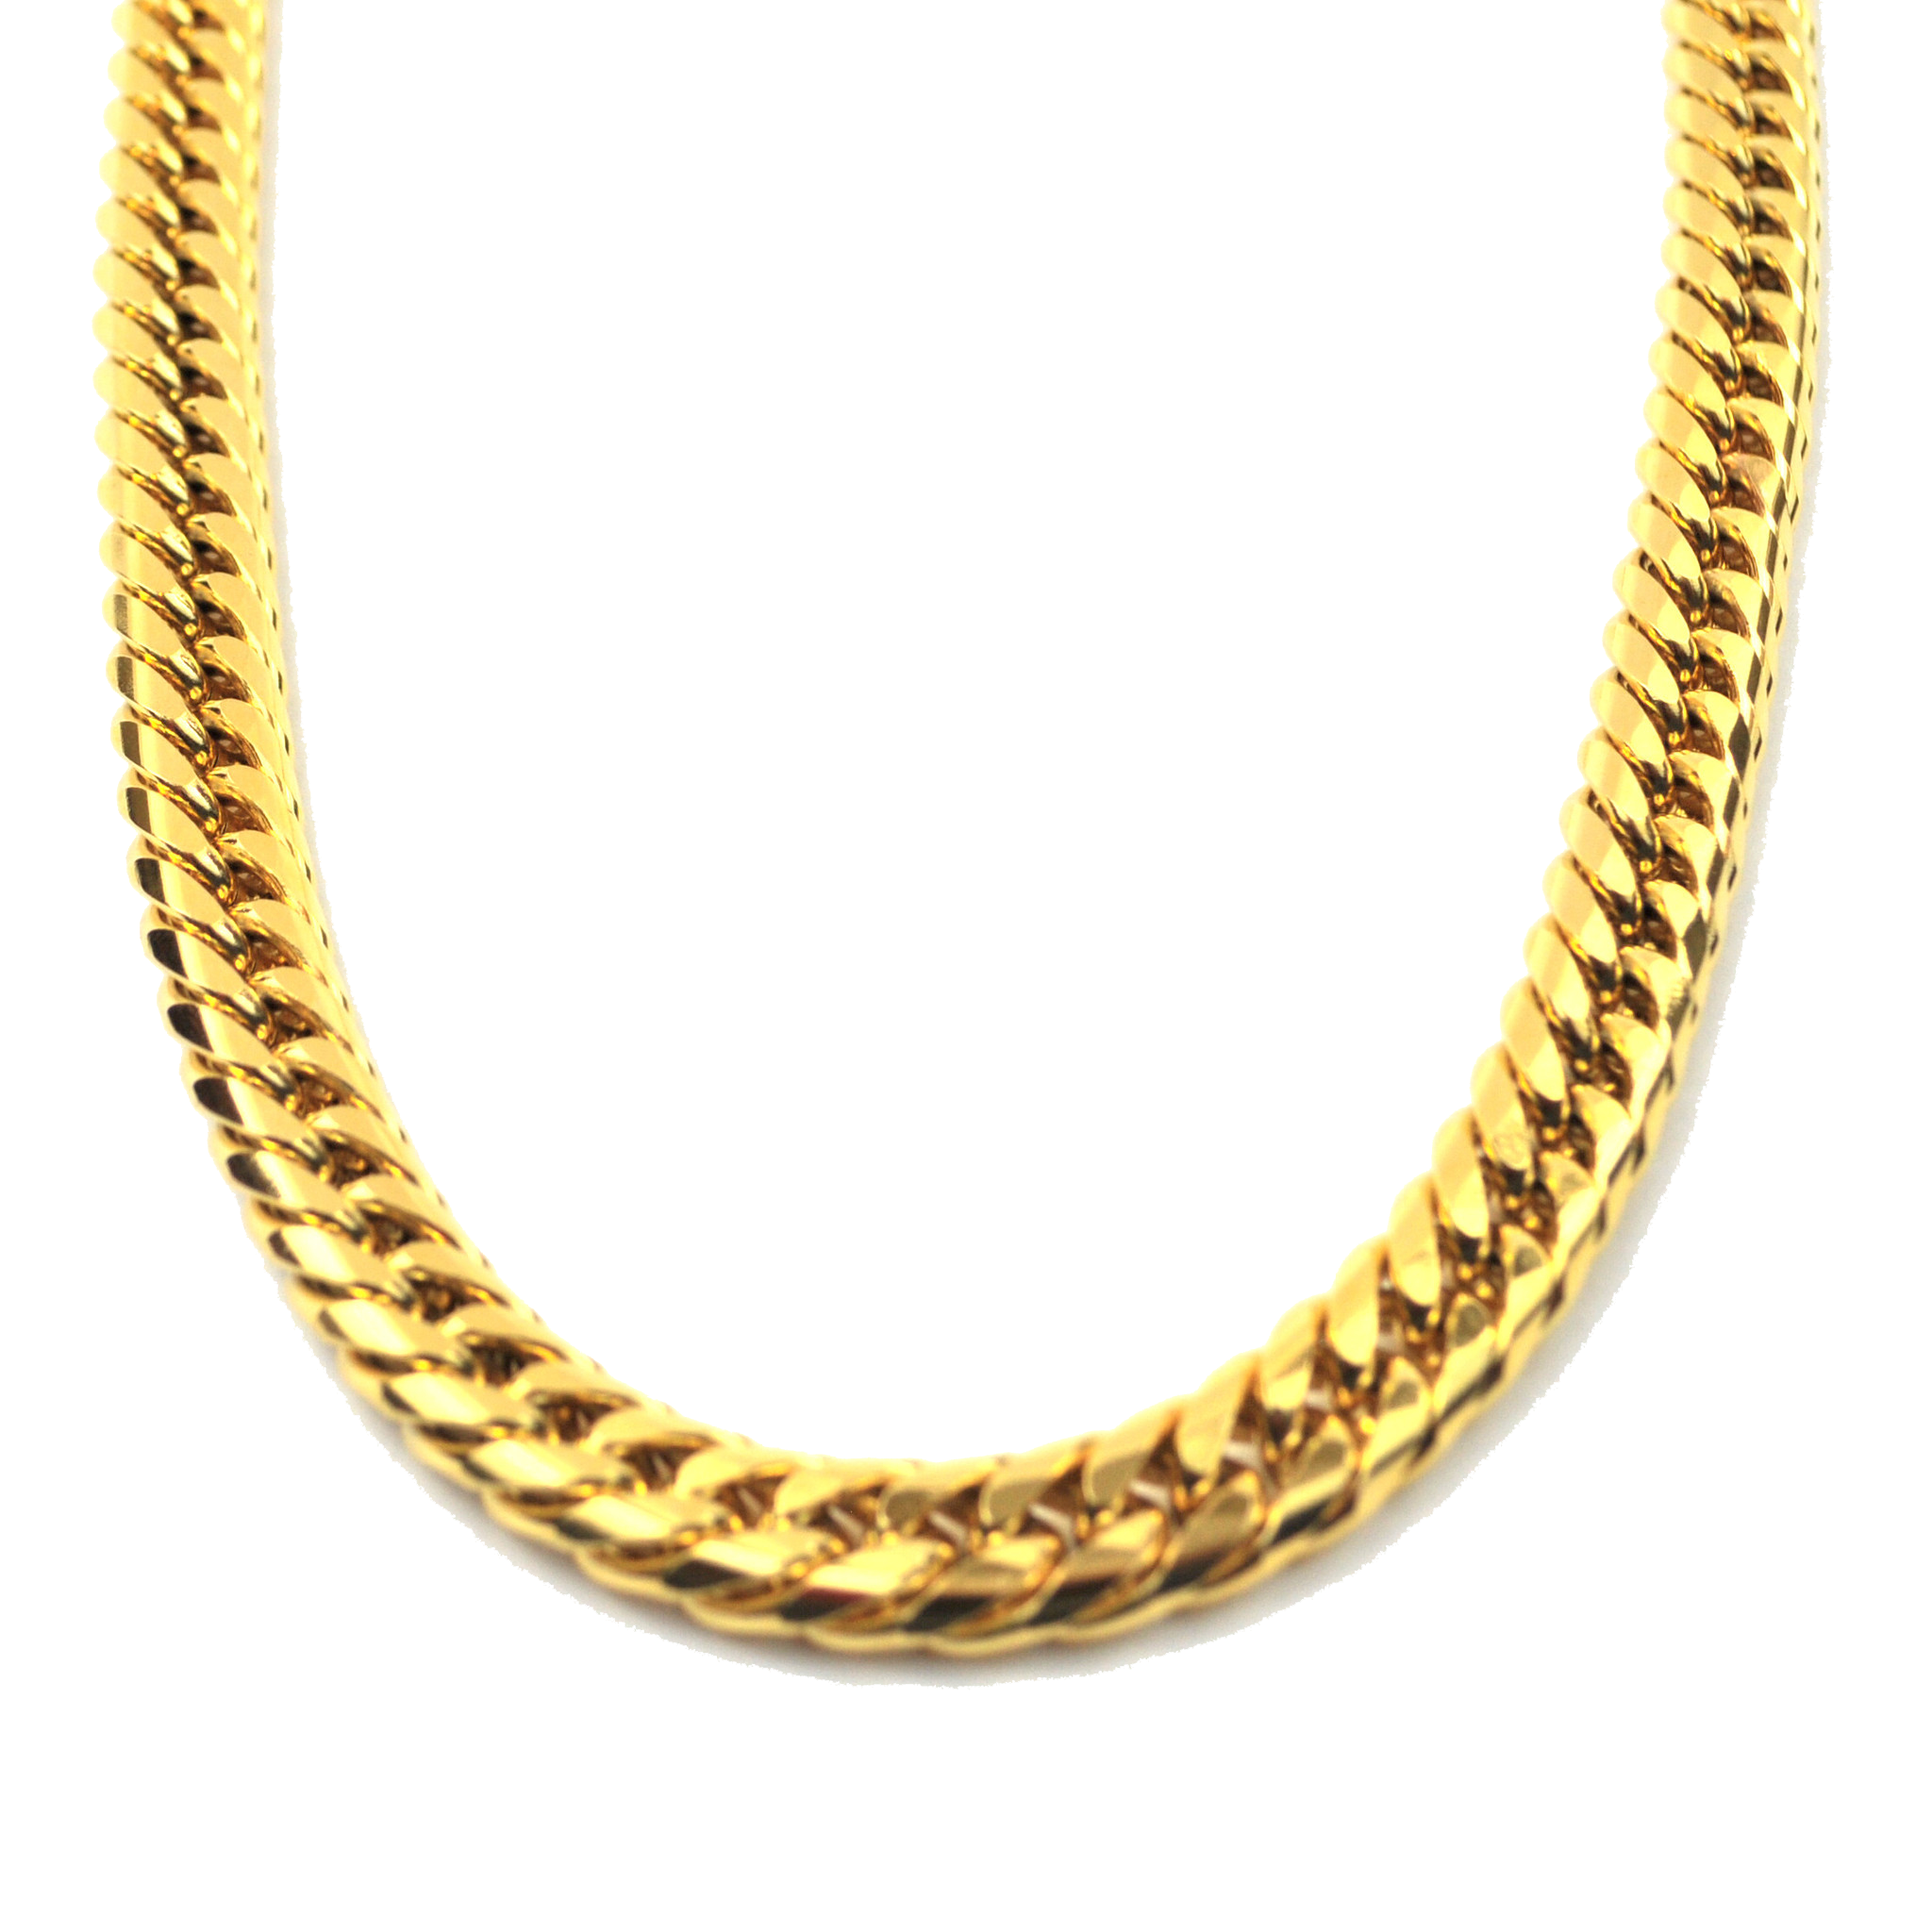 Jewellery Chain PNG Clipart 